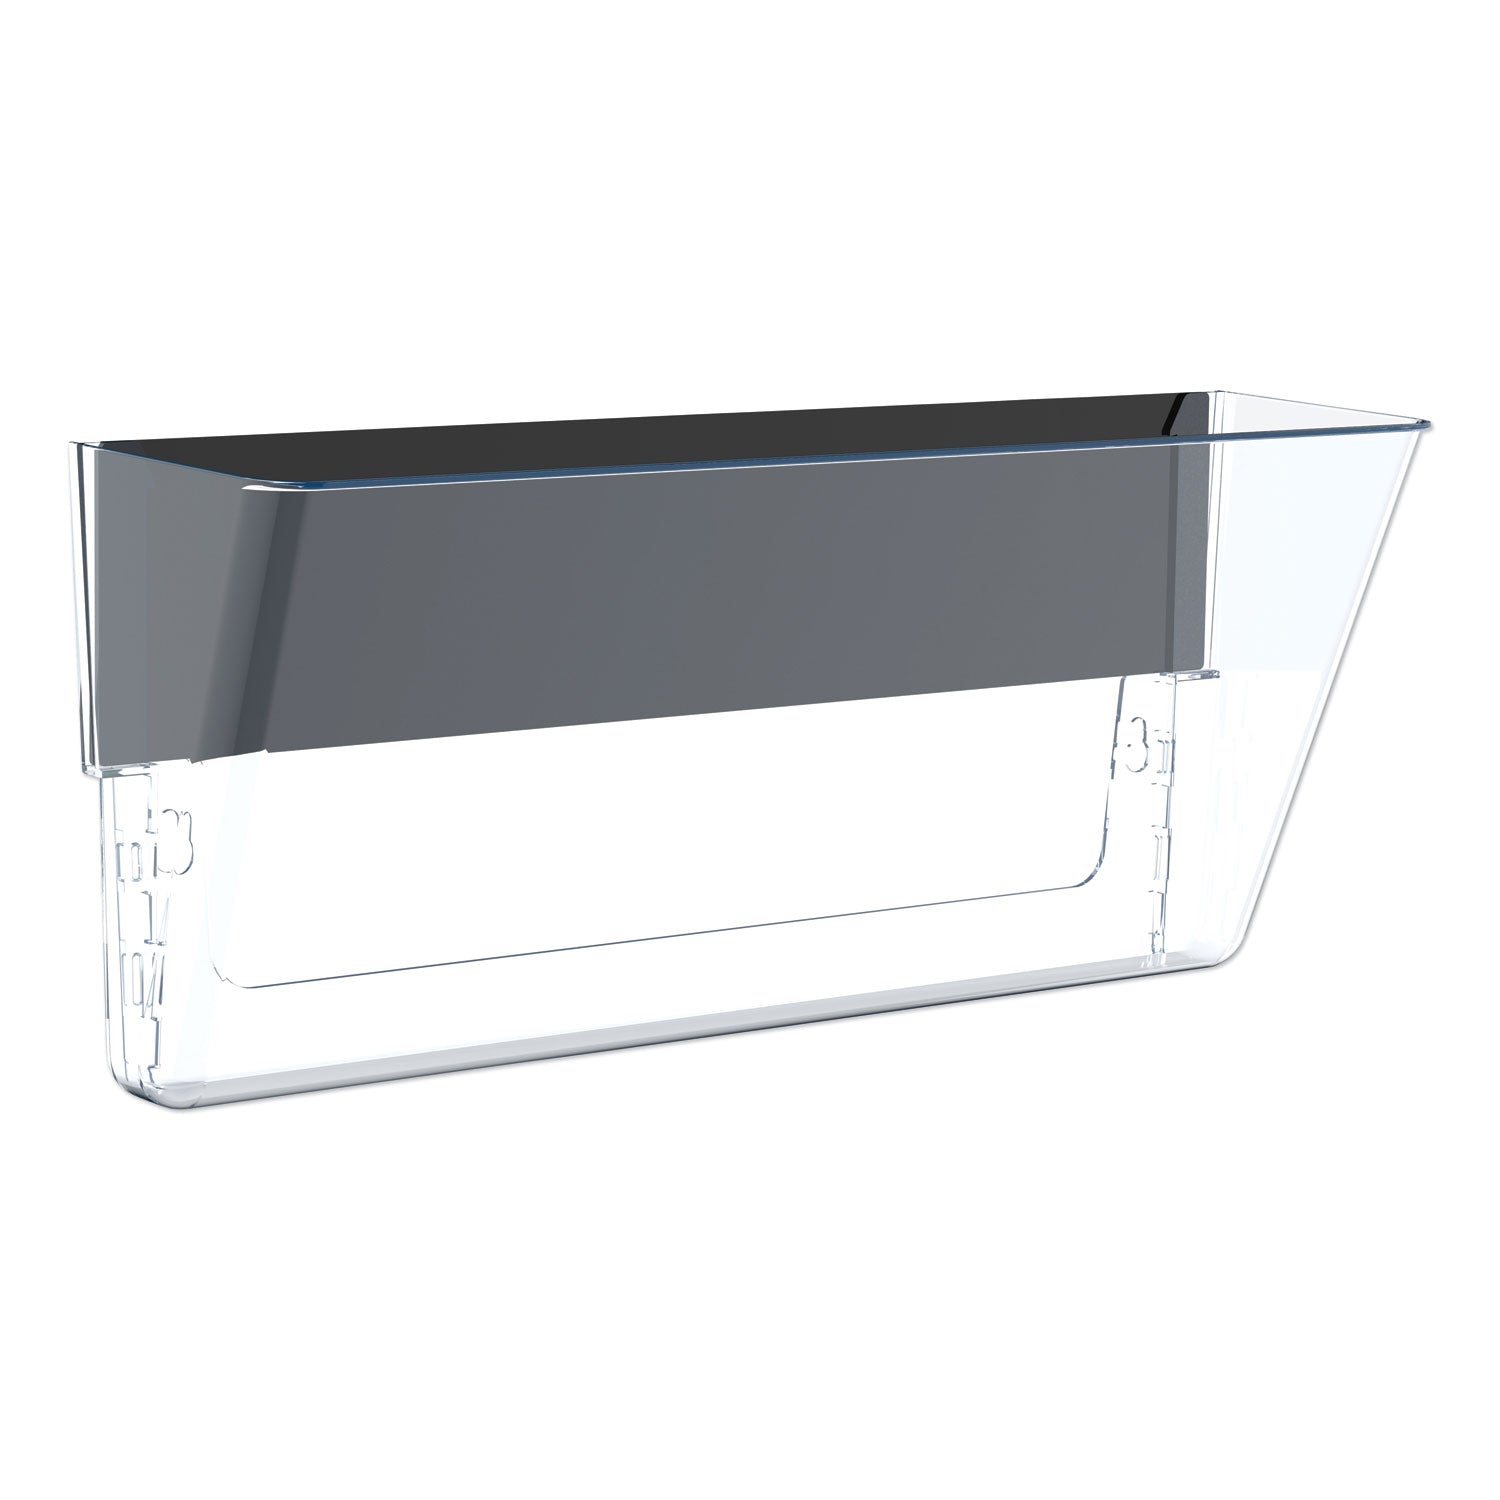 unbreakable-magnetic-wall-file-legal-letter-size-16-x-4-x-7-clear_stx70325u06c - 1